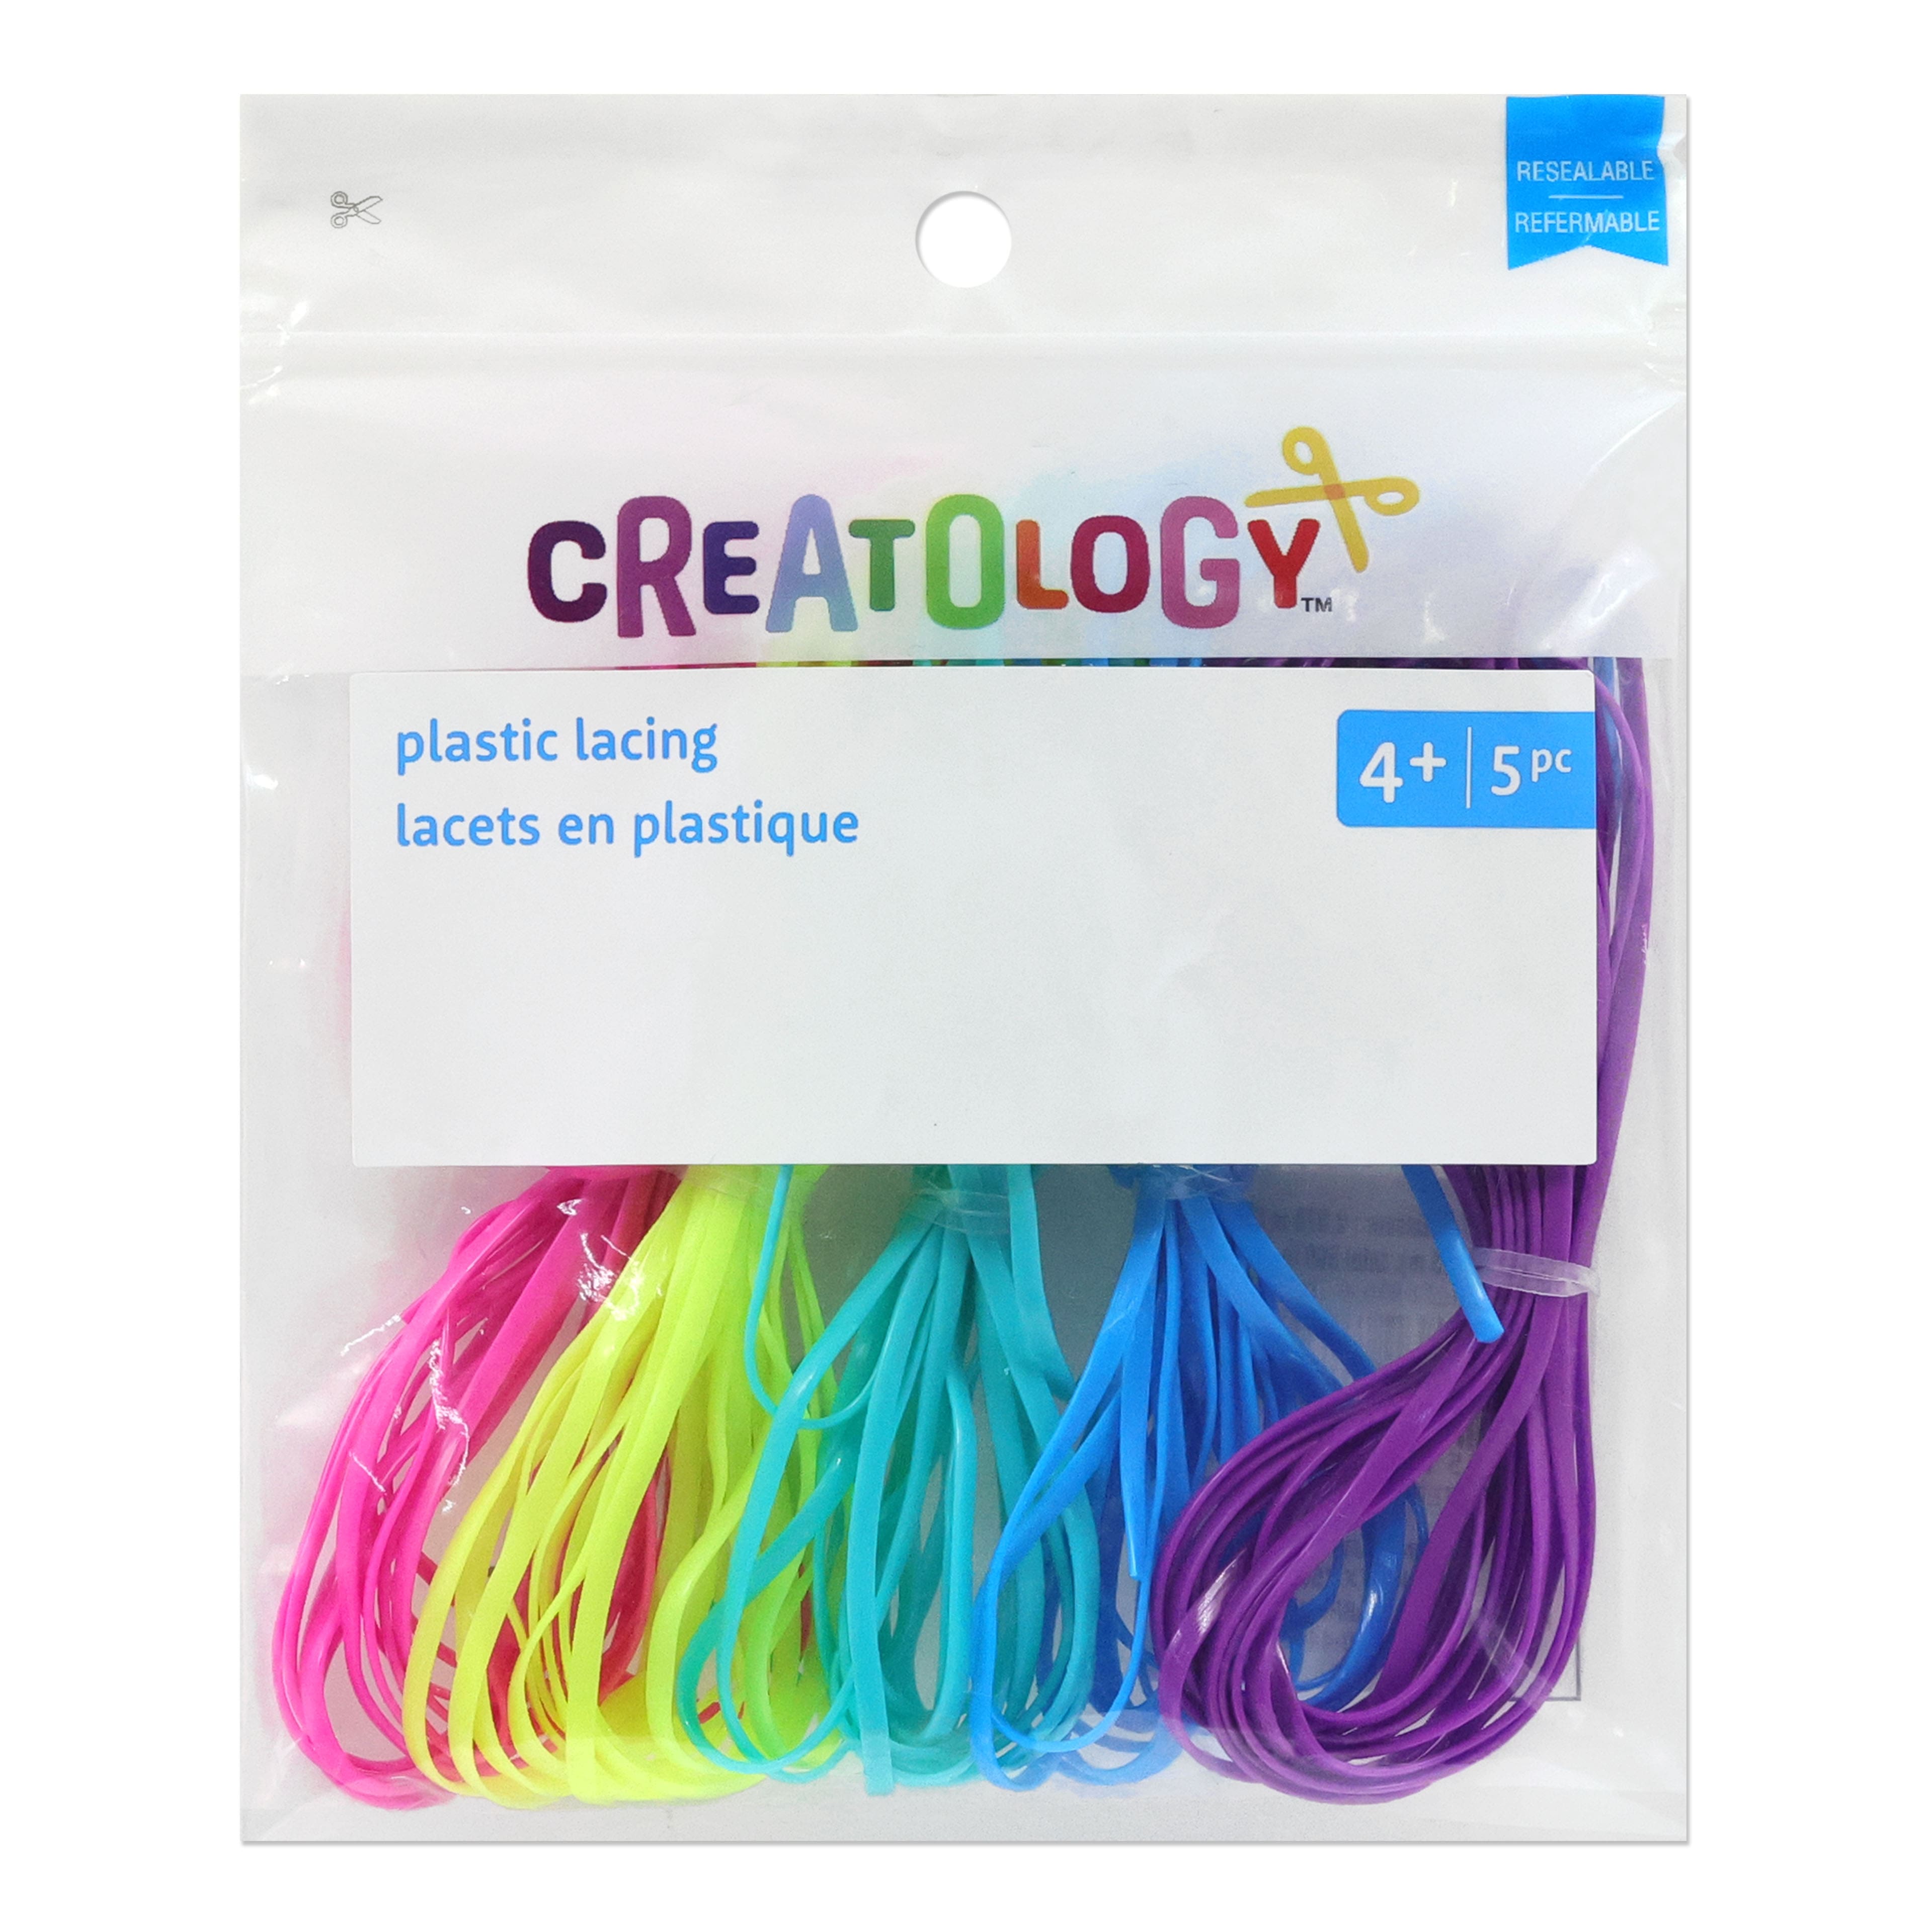 Neon Plastic Lacing by Creatology™